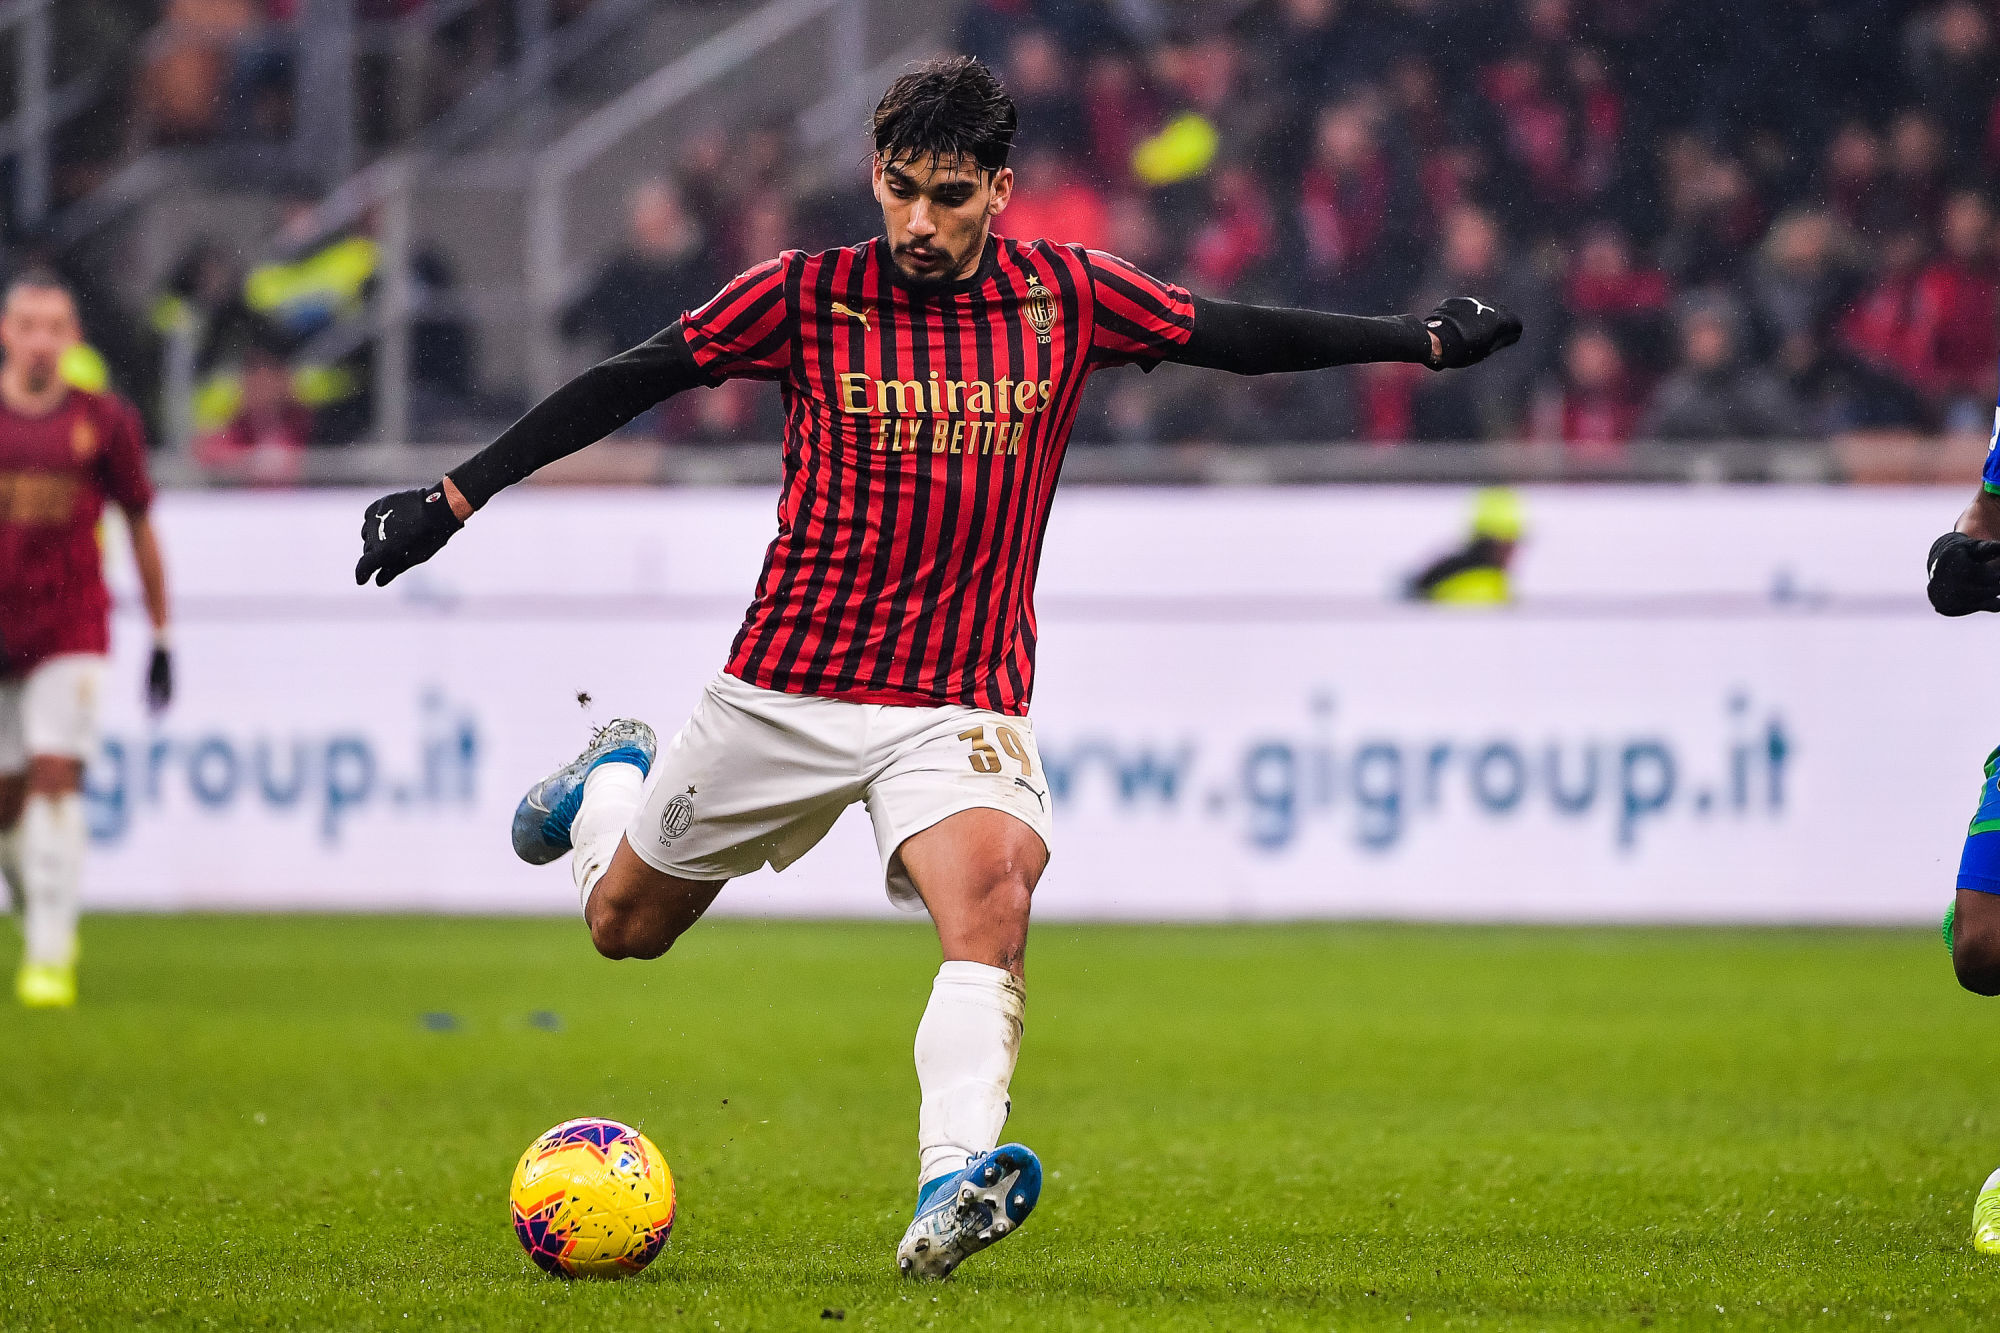 Lucas Paqueta' of AC Milan during the Serie A match between AC Milan and Sassuolo at Stadio San Siro, Milan, Italy on 15 December 2019. Photo by Mattia Ozbot.

Editorial use only, license required for commercial use. No use in betting, games or a single club/league/player publications.
PILKA NOZNA SEZON 2019/2020 LIGA WLOSKA
FOT. SPORTPHOTO24/NEWSPIX.PL
ENGLAND OUT!
---
Newspix.pl 

Photo by Icon Sport - Lucas PAQUETA - San Siro - Milan (Italie)